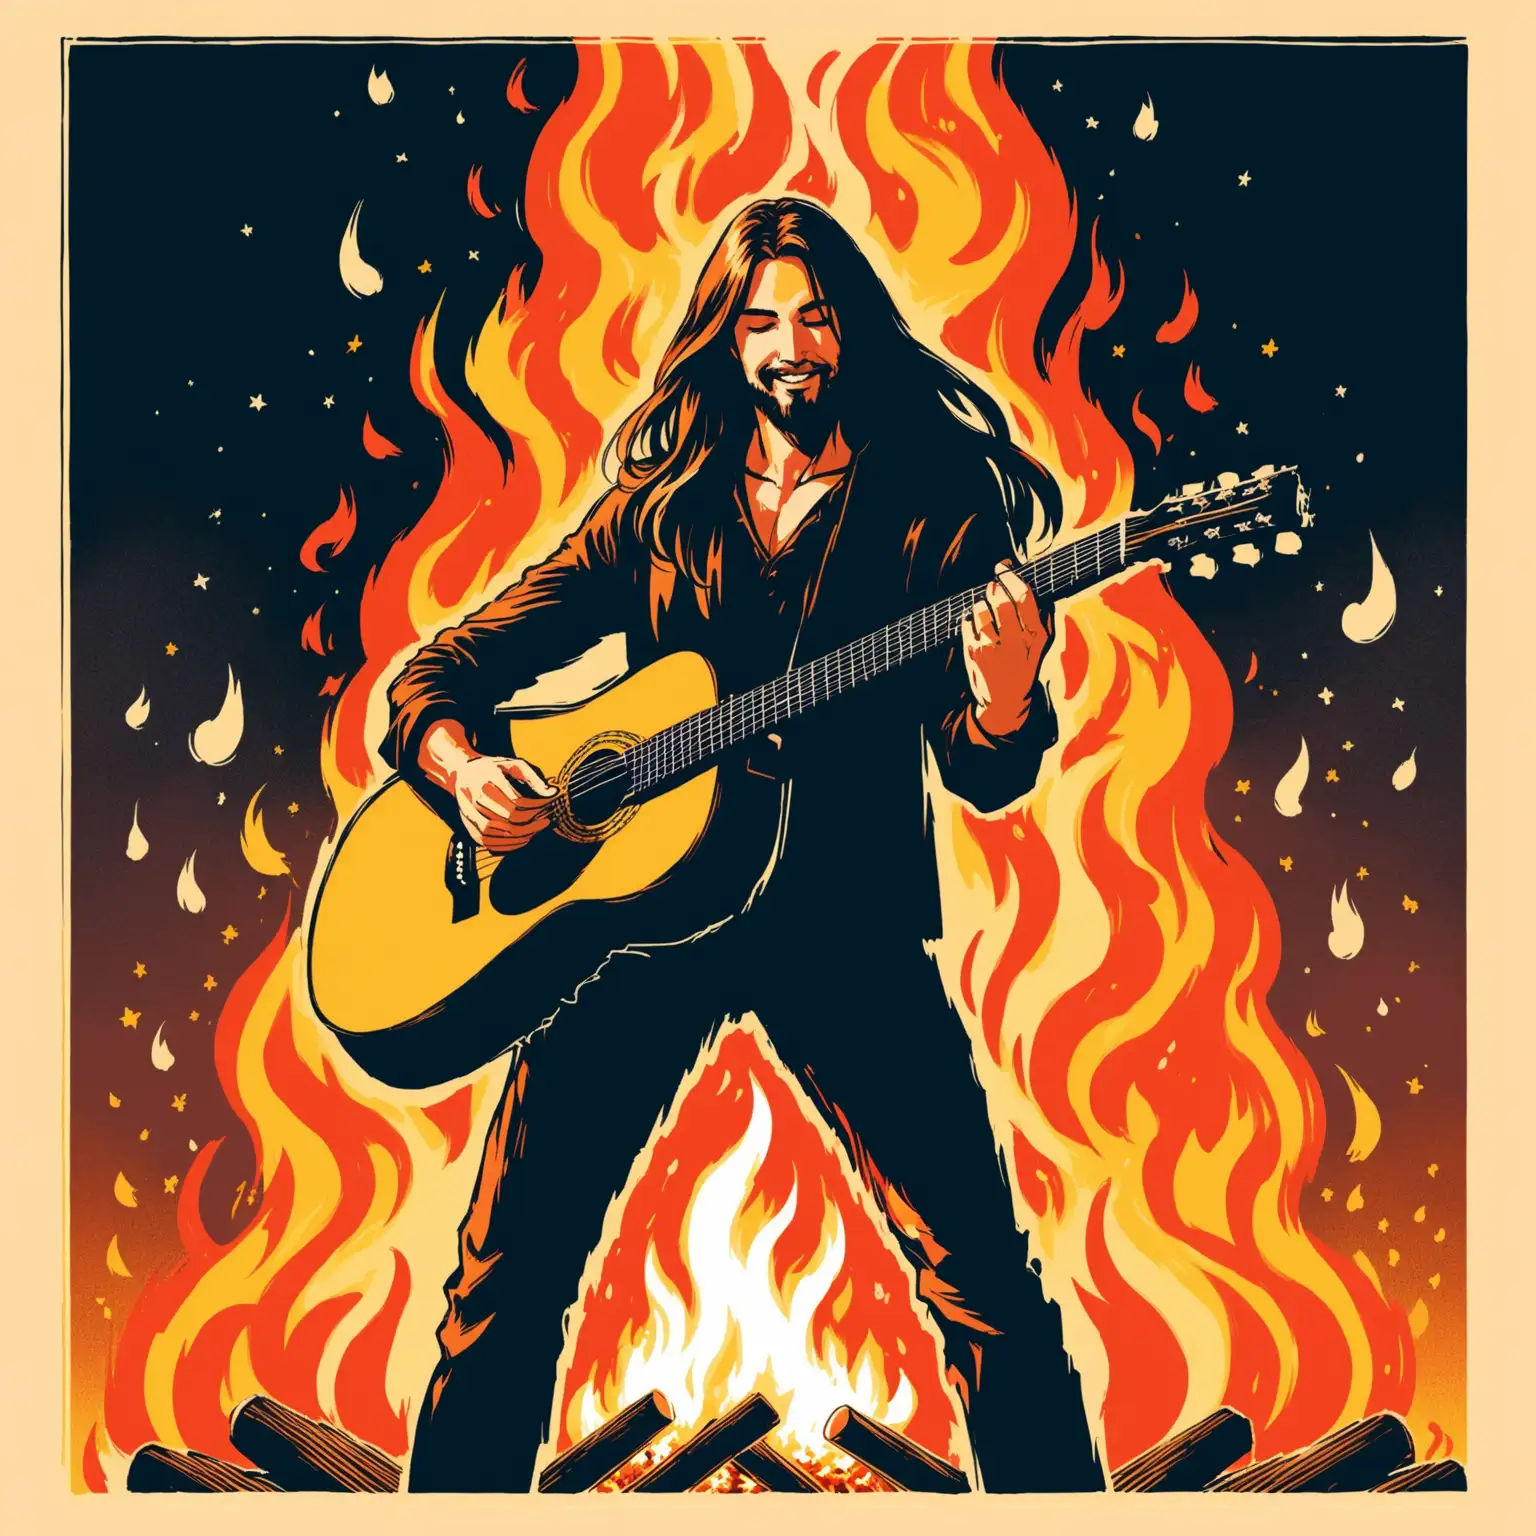 LongHaired Man Joyfully Playing Guitar by Bonfire Concert Poster Style